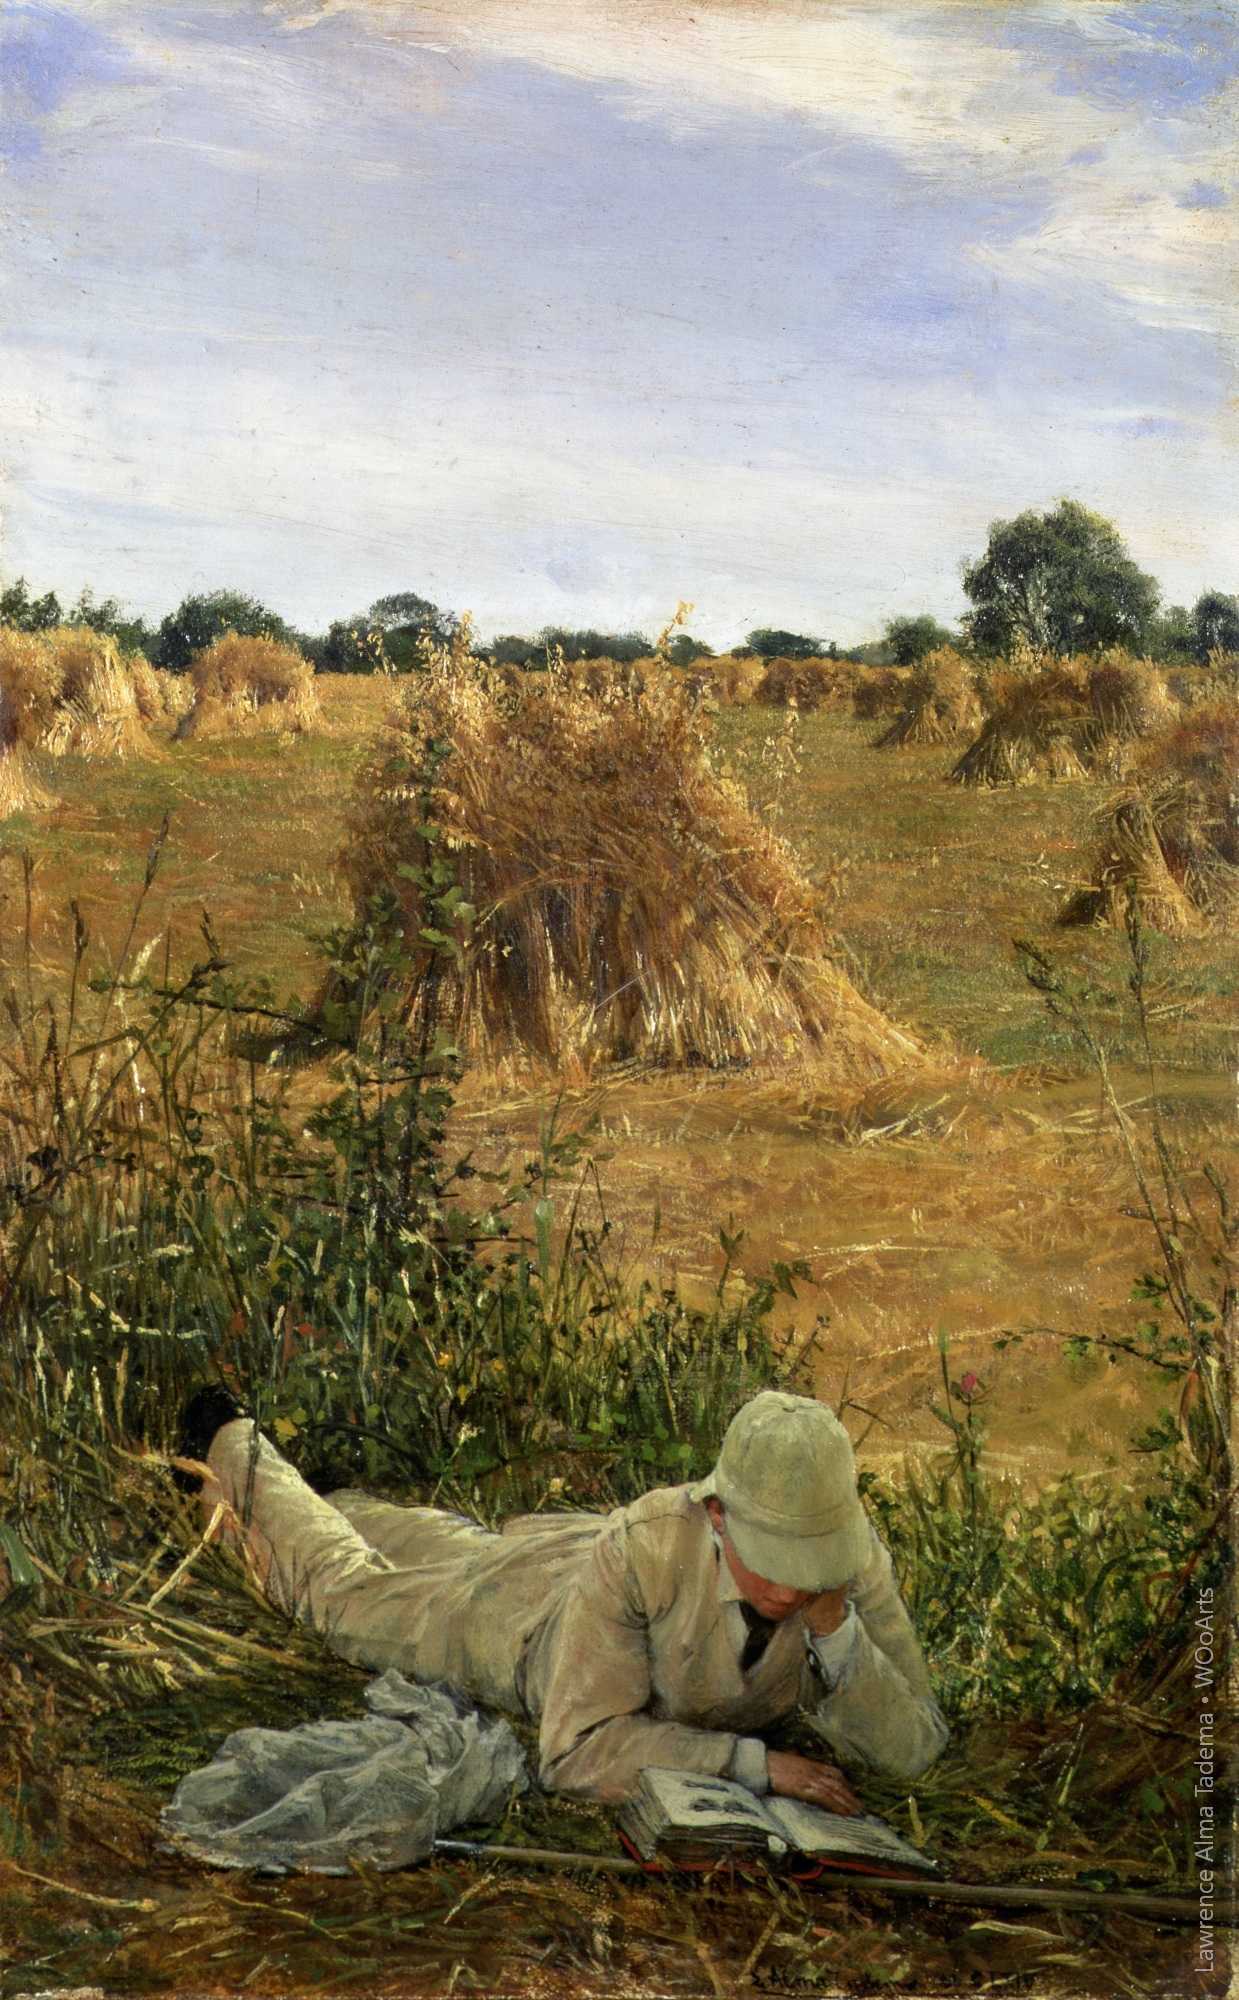 Painting by Lawrence Alma-Tadema